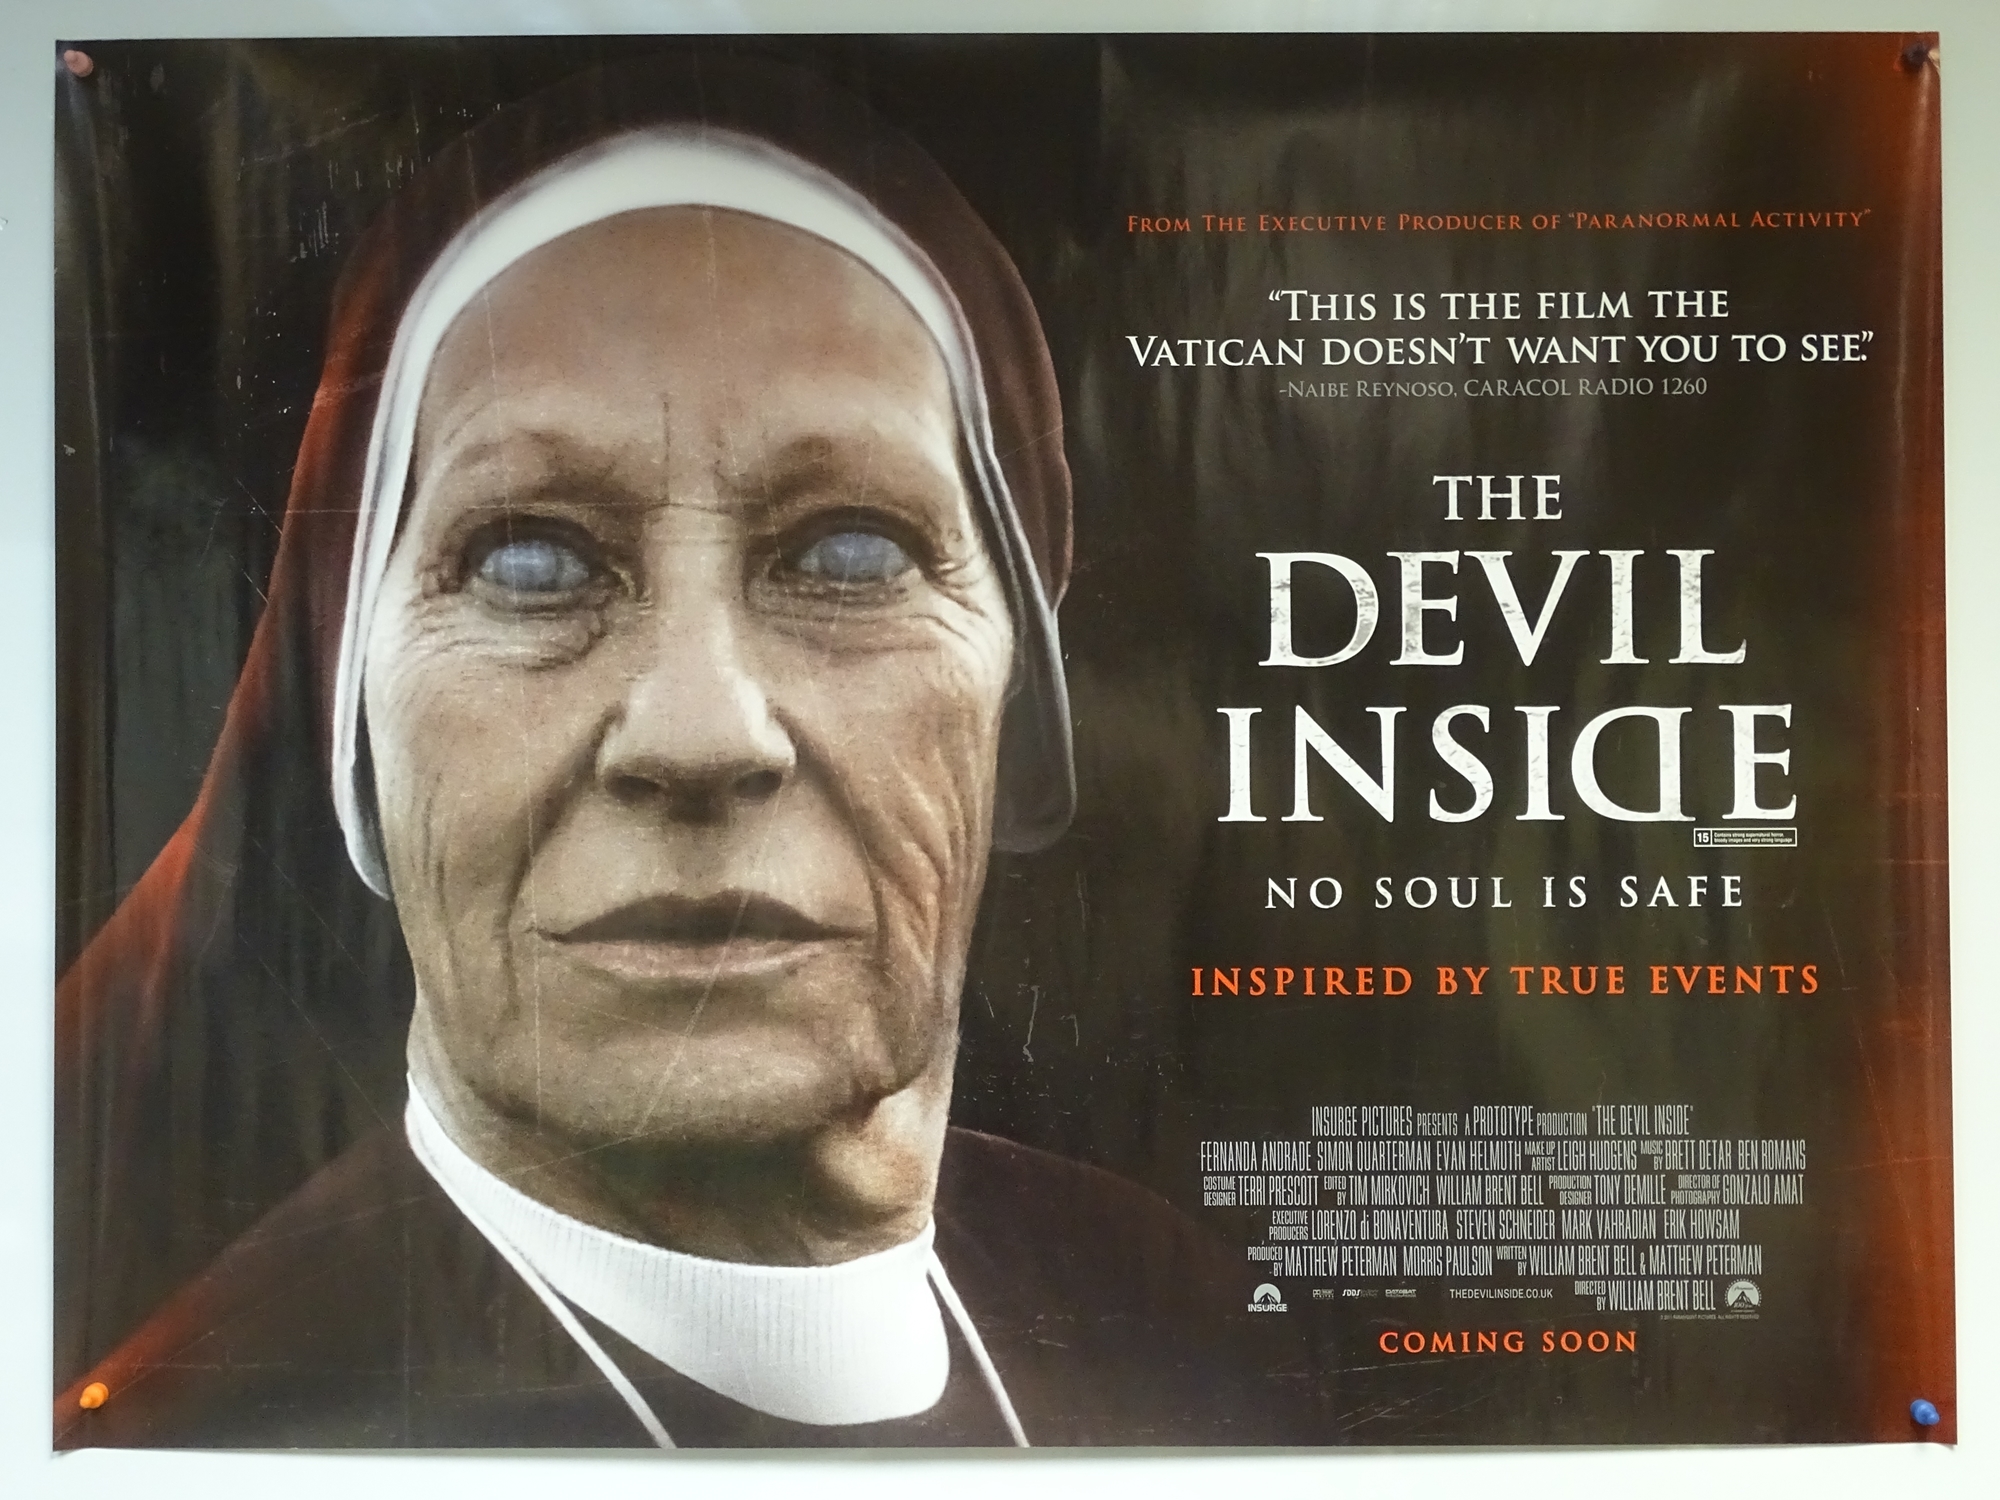 THE DEVIL INSIDE (2012) - HORROR - UK QUAD FILM / MOVIE POSTER - ROLLED AS ISSUED